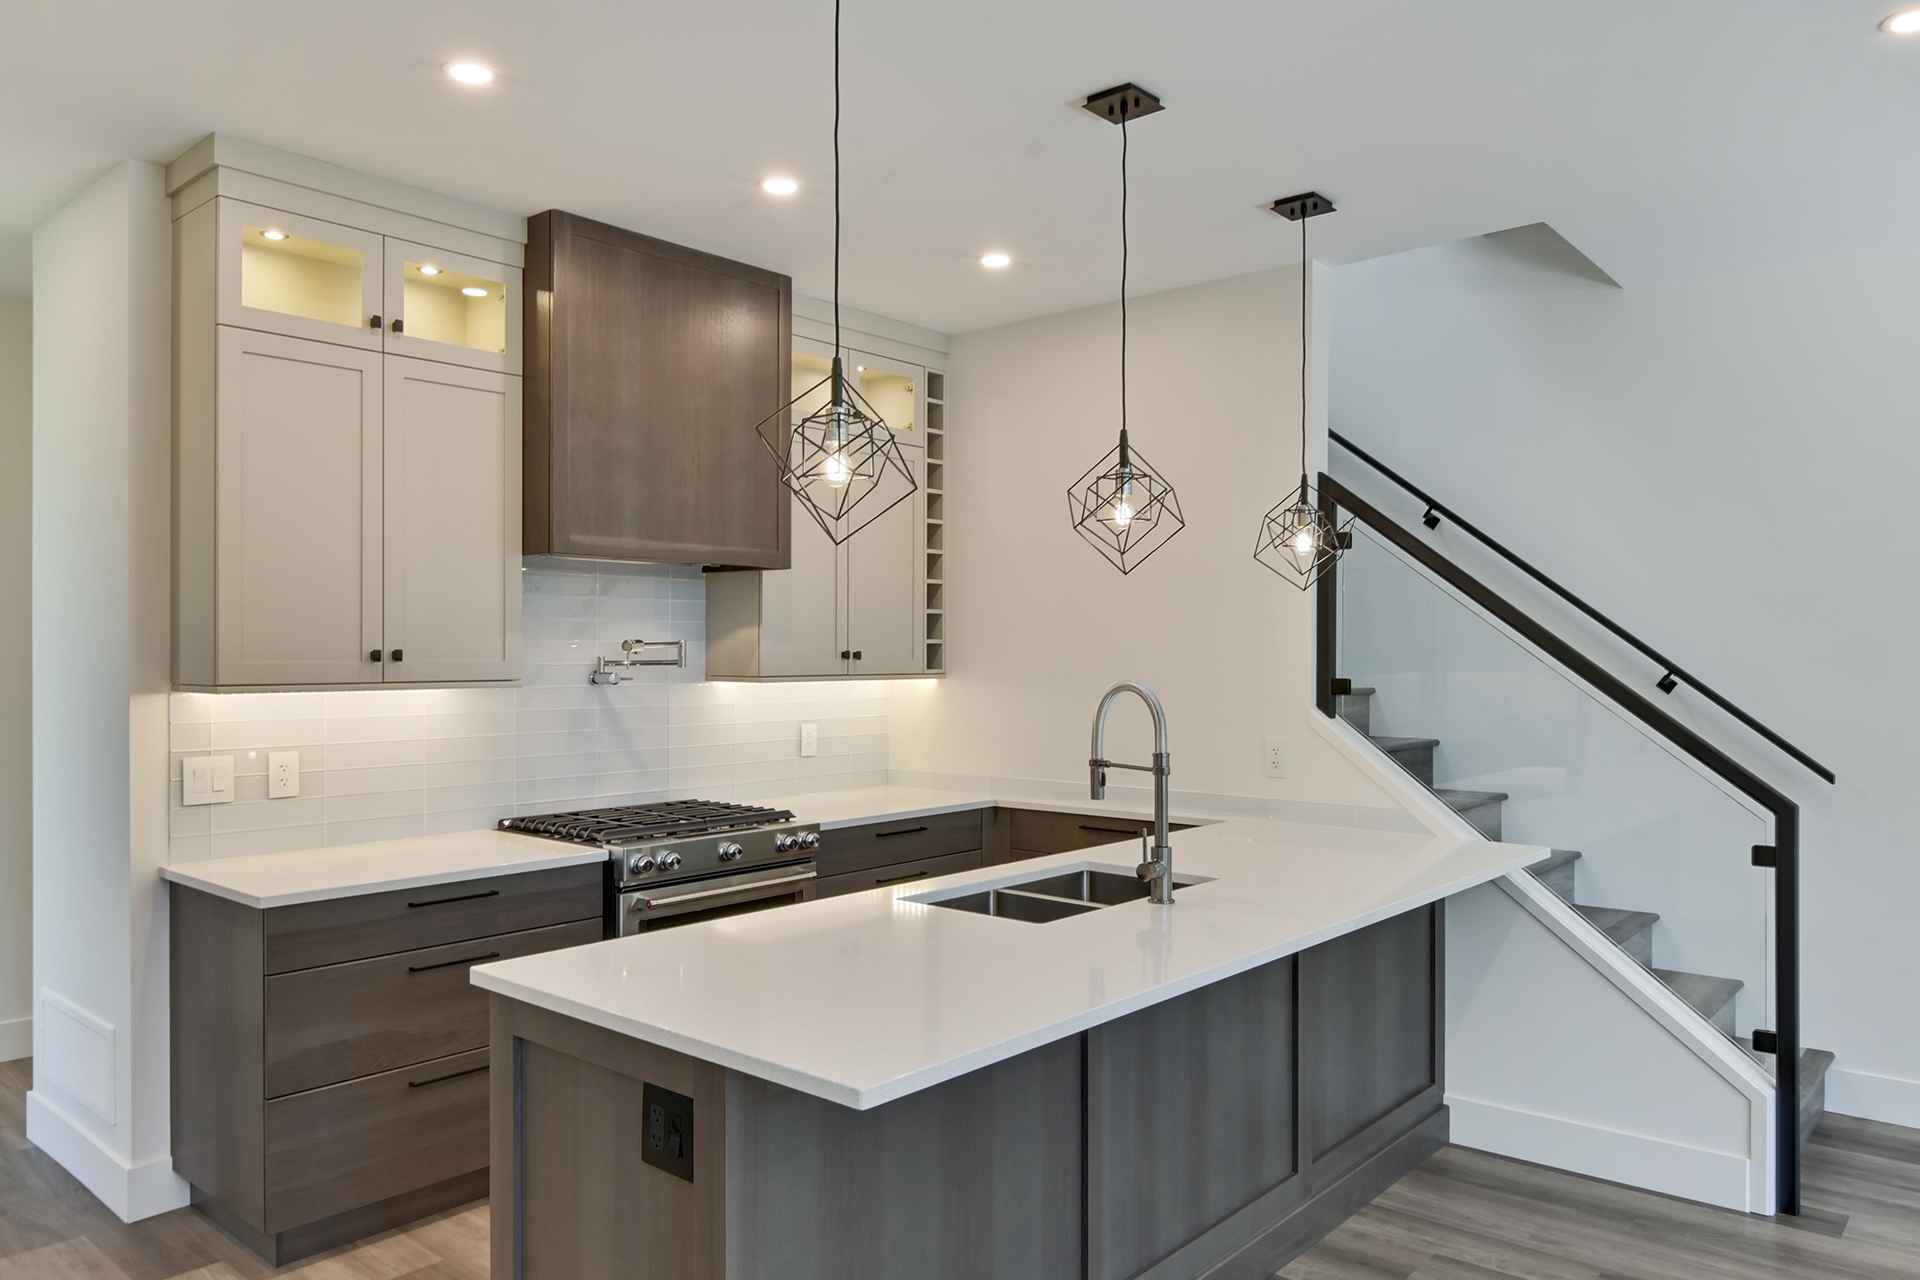 1_harmony_homes_stockwell_ave_infil_project_wash_gallery_image_12